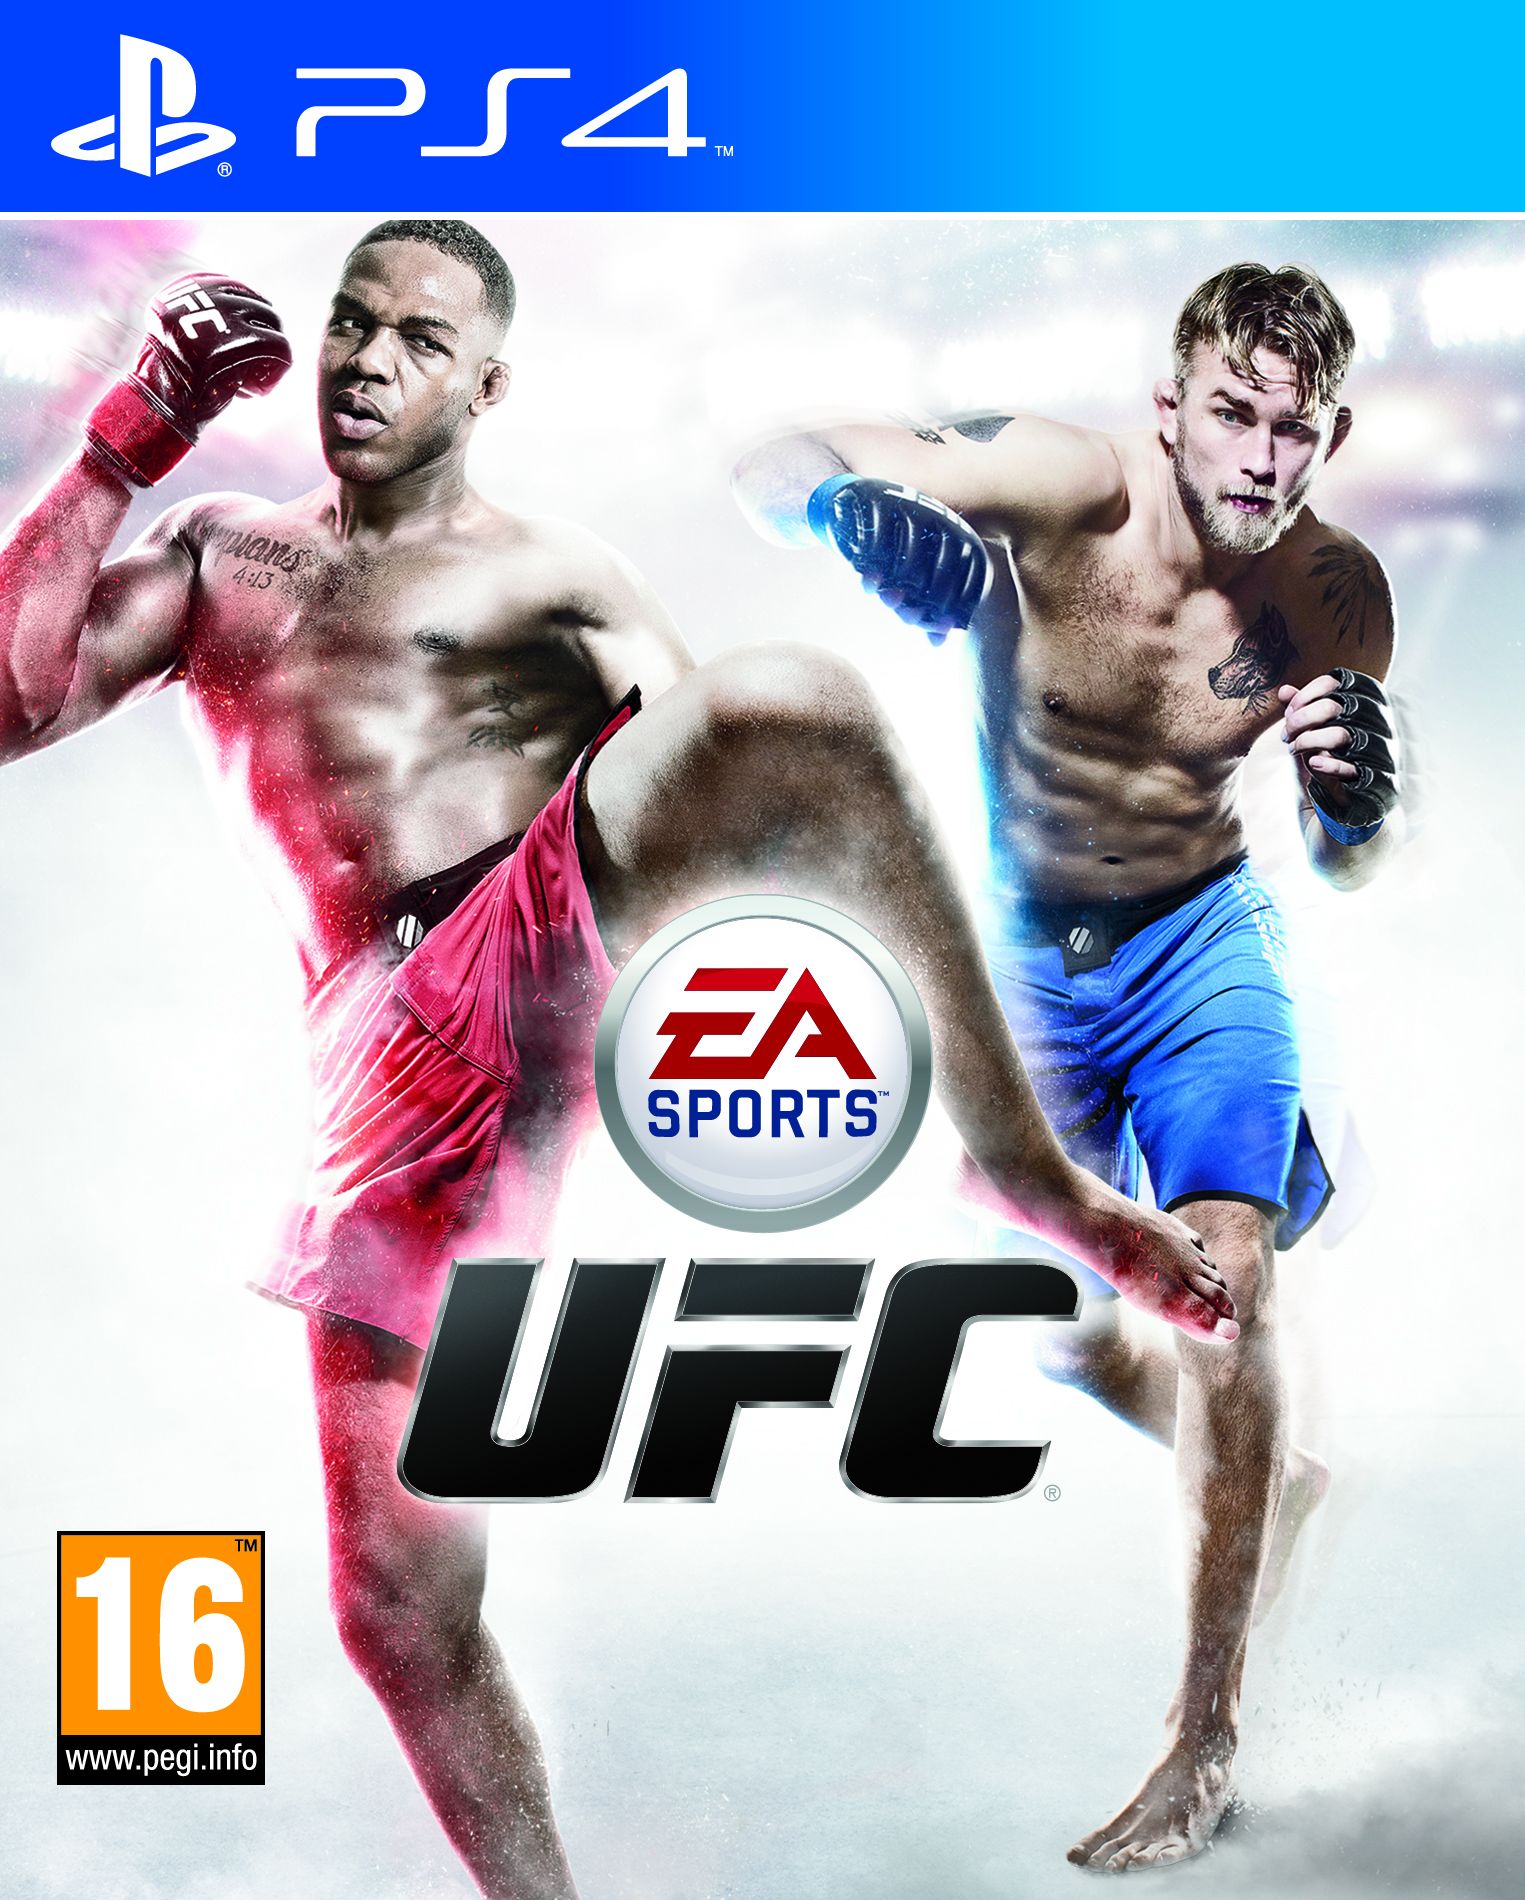 EA Sports UFC (Ultimate Fighting Championship)